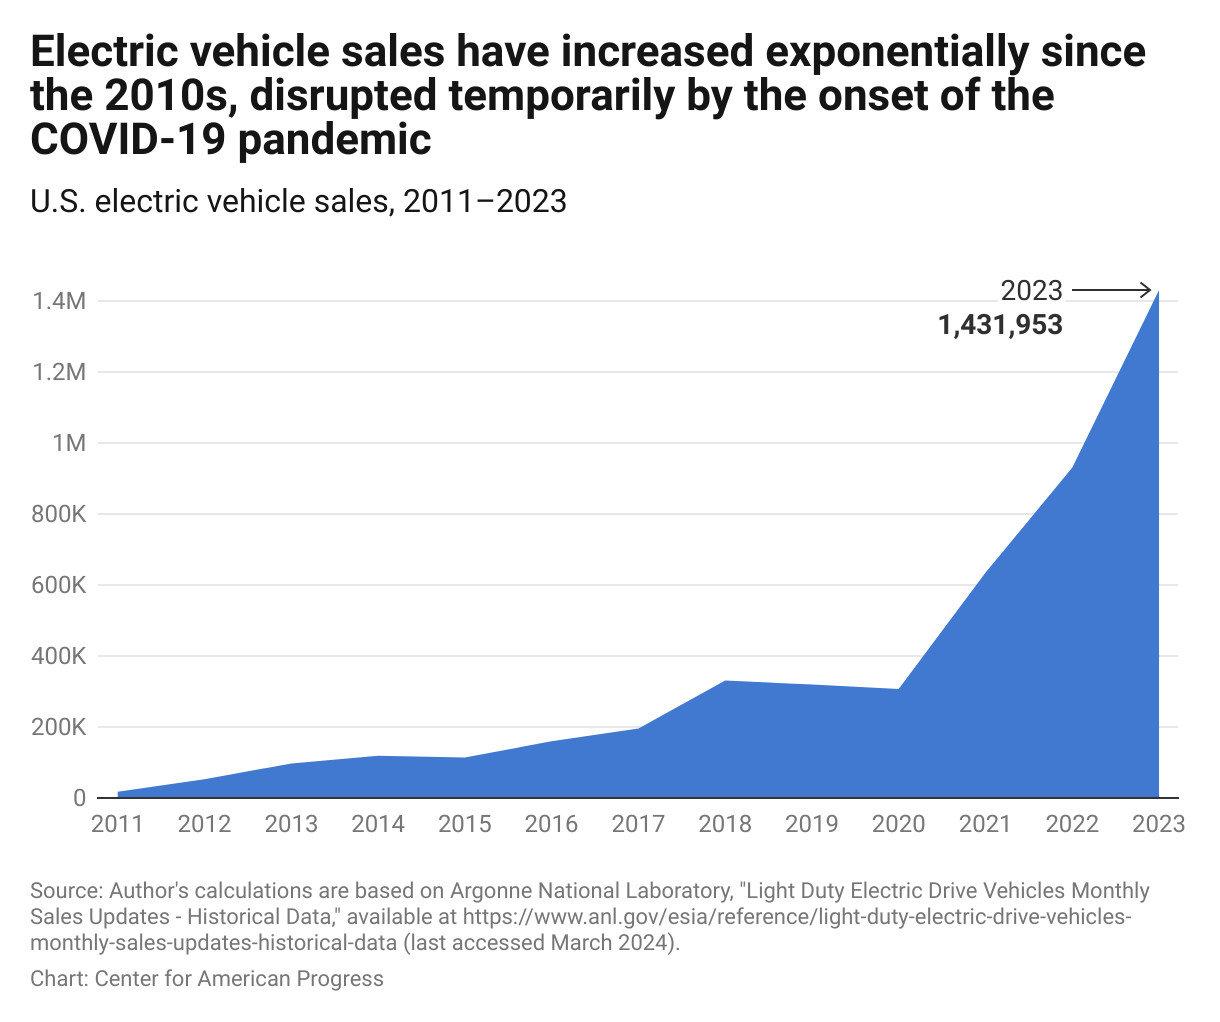 Graphical representation of U.S. electric vehicle sales from 2011 to 2023, with sales increasing from 17,763 in 2011 to 1,403,908 in 2023.